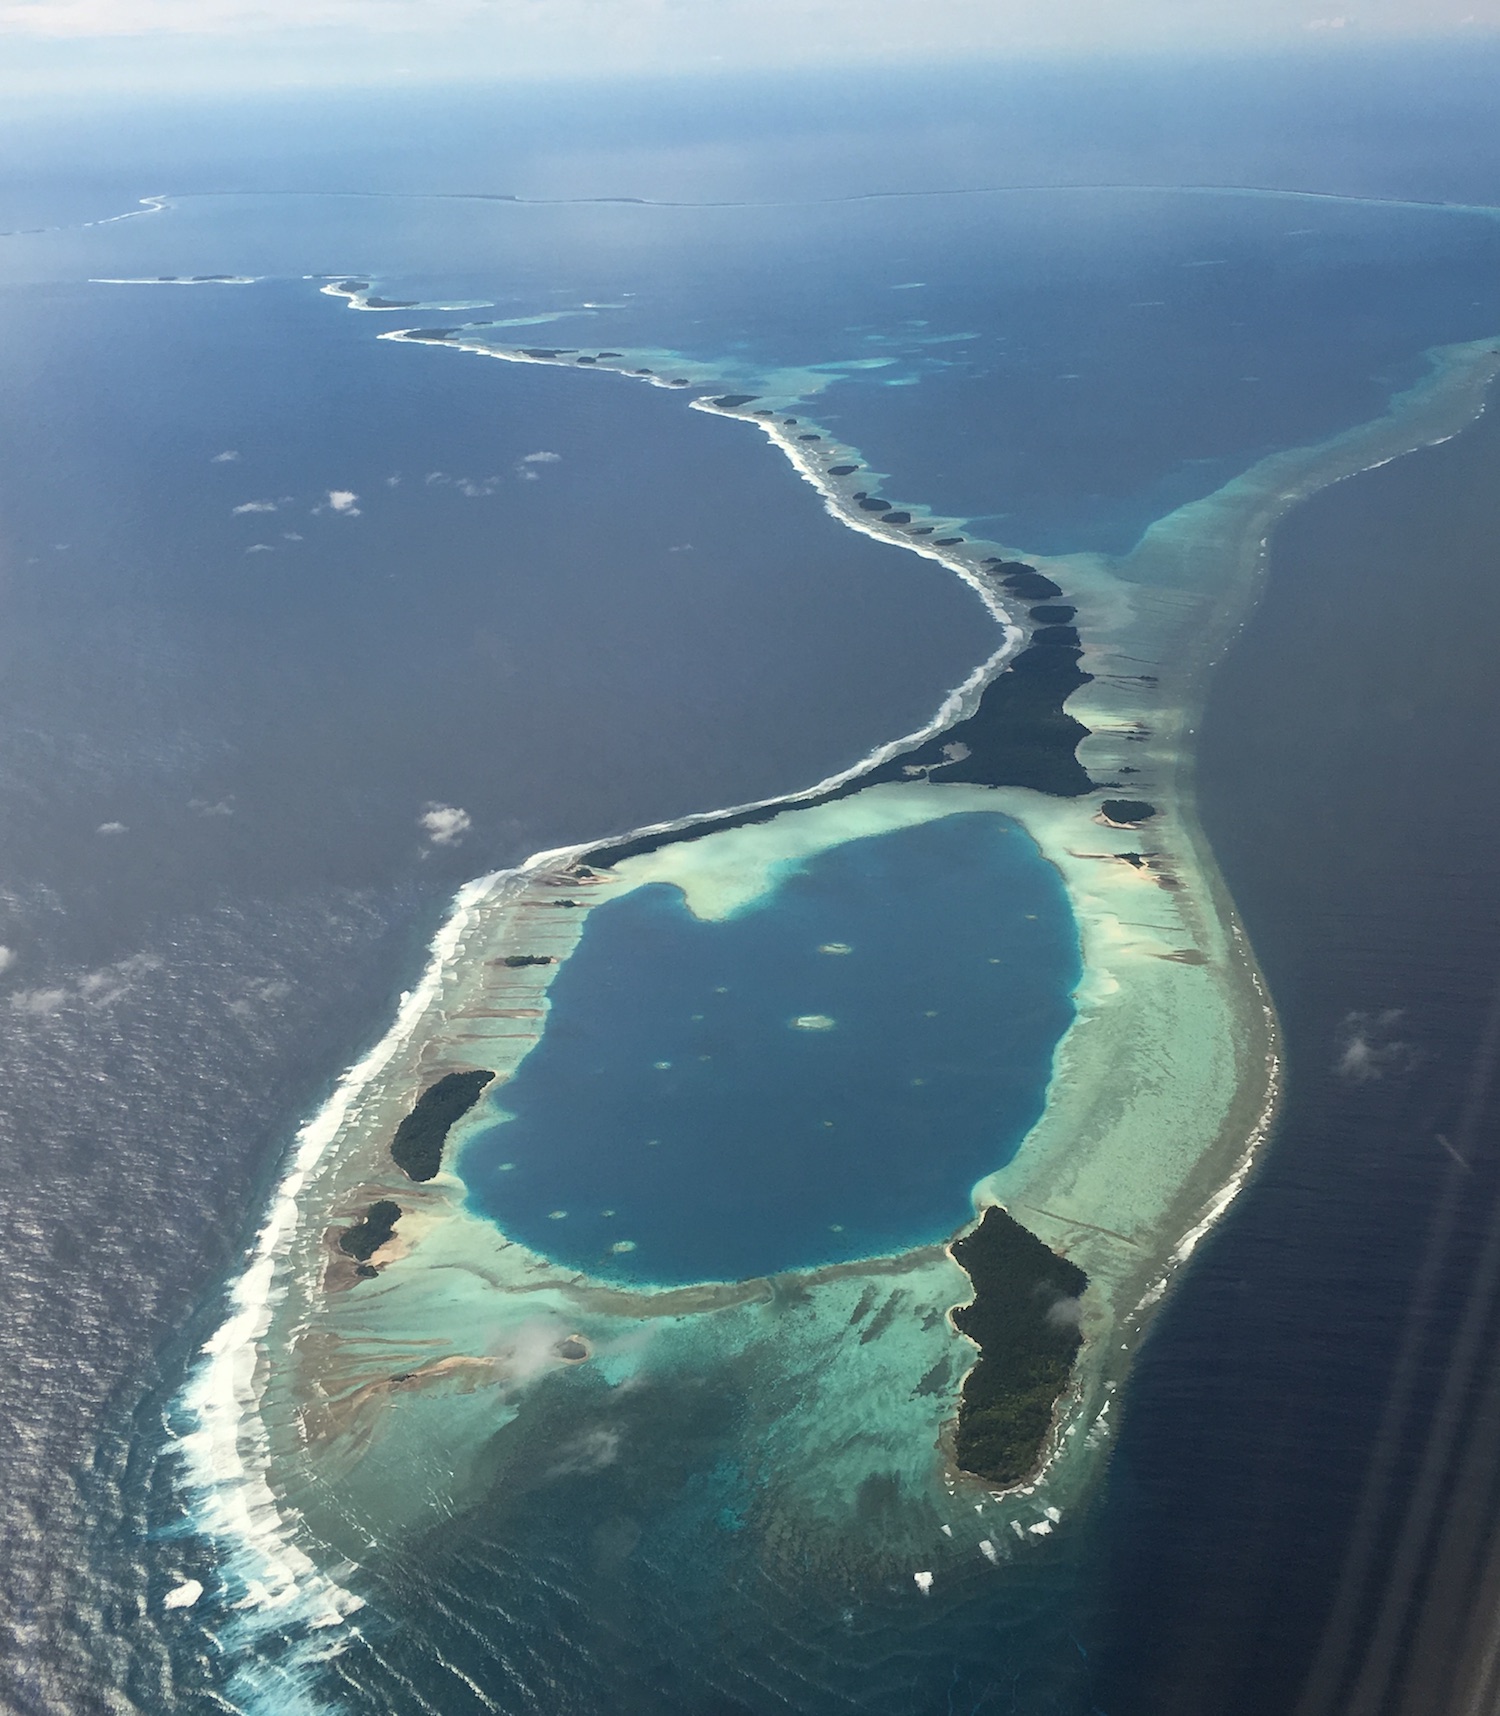 Dazzling Arno Atoll in figure of 8 from the air